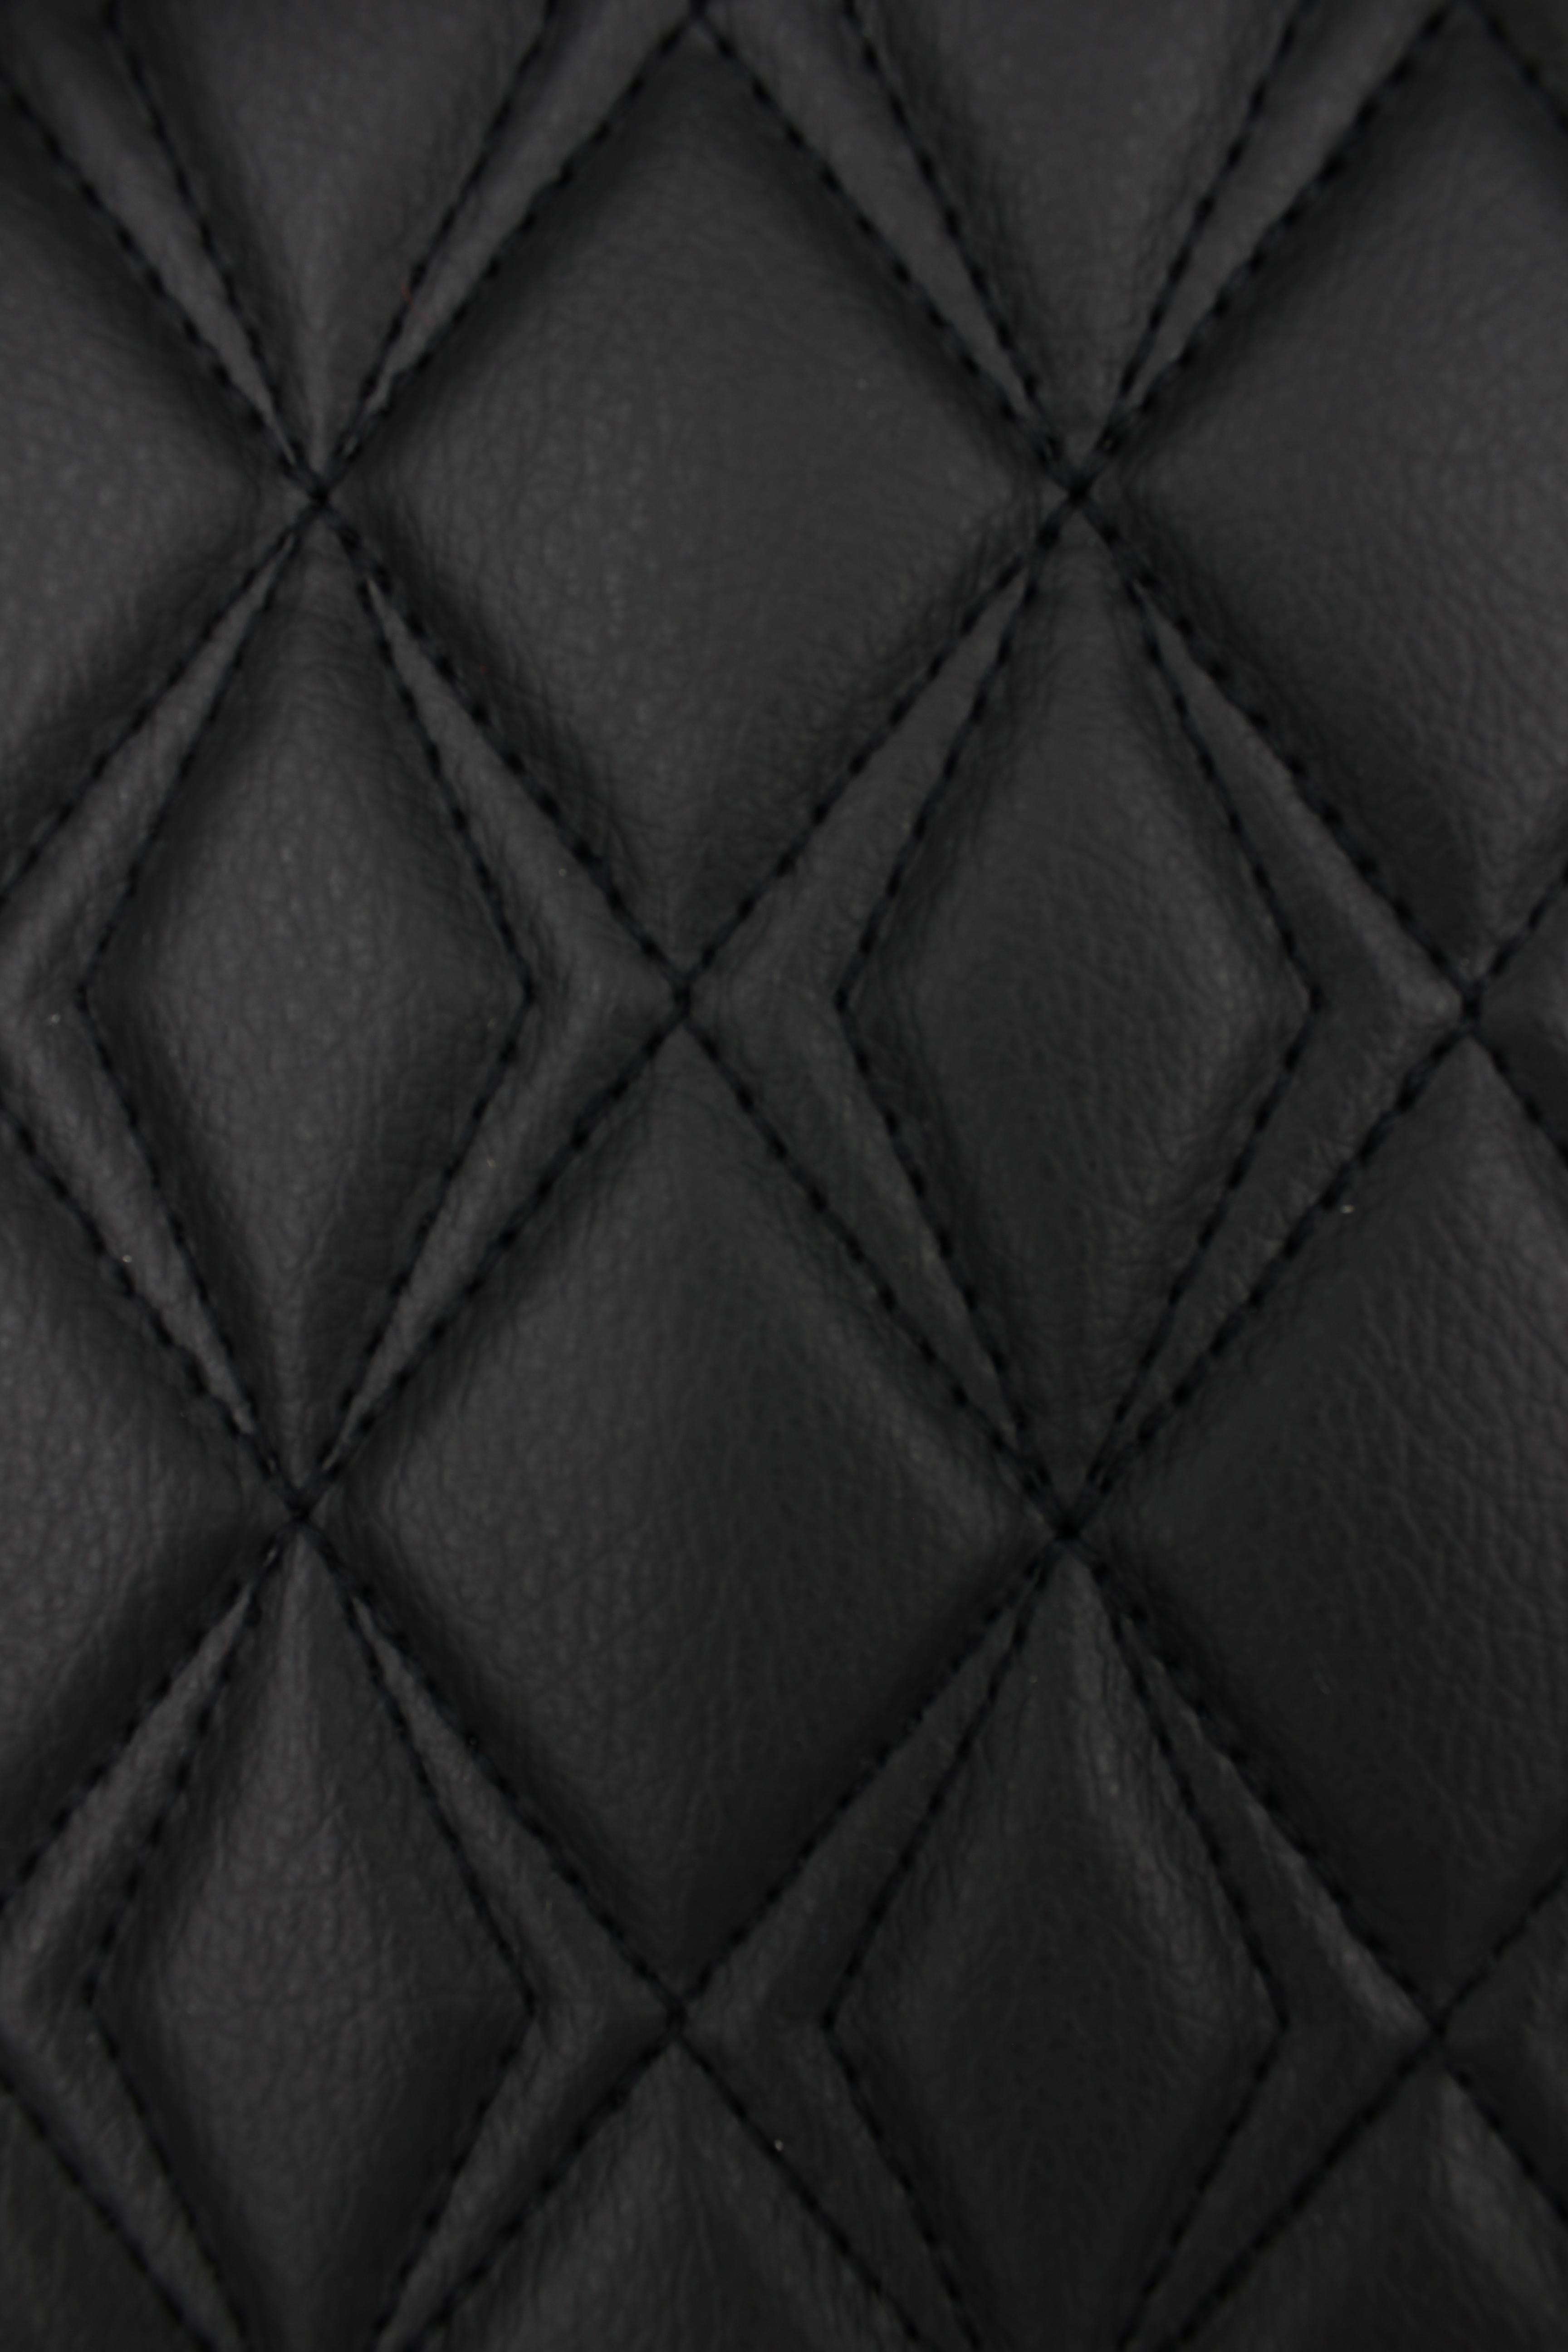 Black Upholstery Synthetic Double Diamond Stitched Leather & Foam Backing - Perfect for DIY Projects |Car Seats | Door ,Interior, Headline |140cm Width